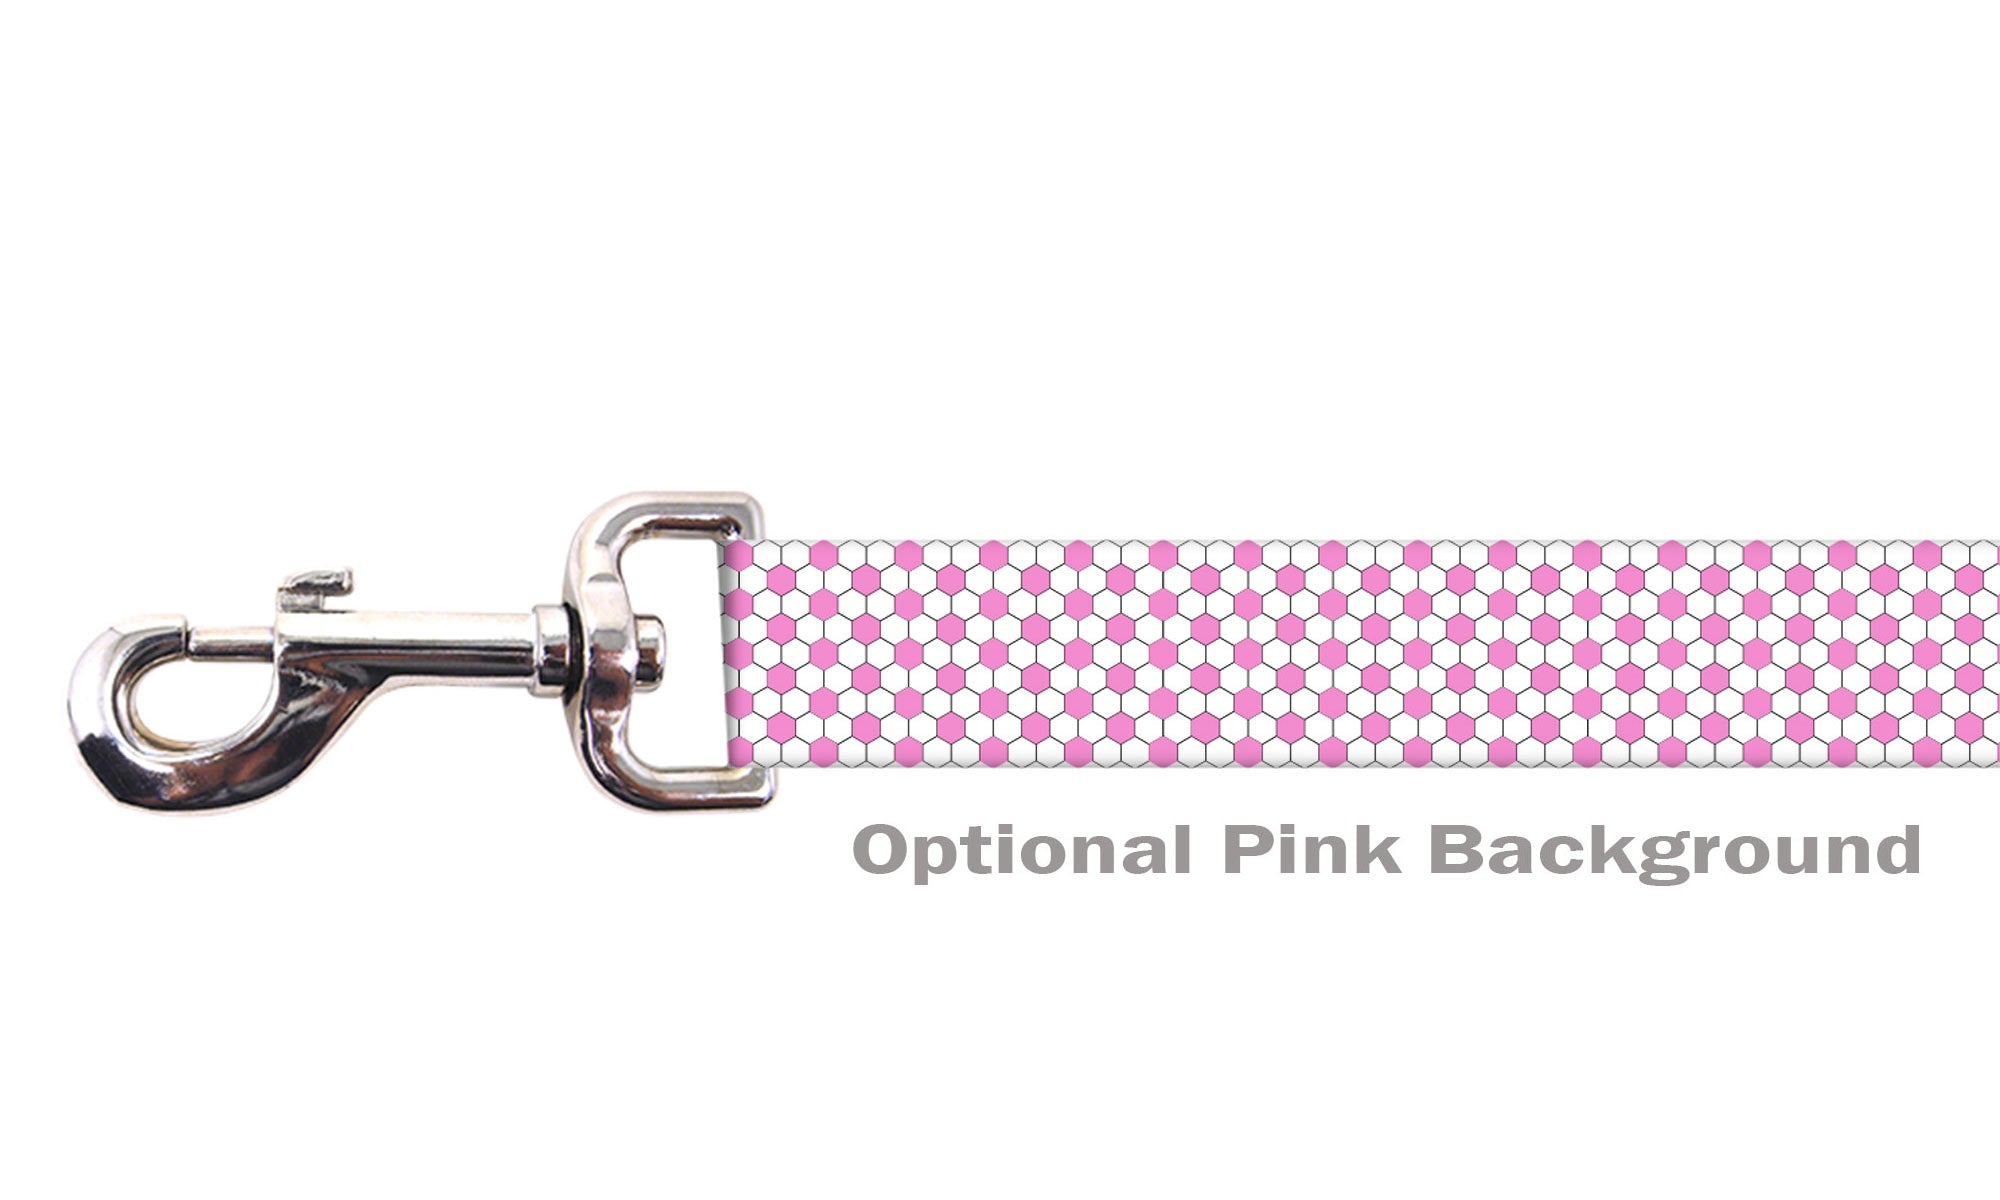 Azerbaijan Dog Leash for Soccer Fans | Black or Pink | 6 or 4 Foot